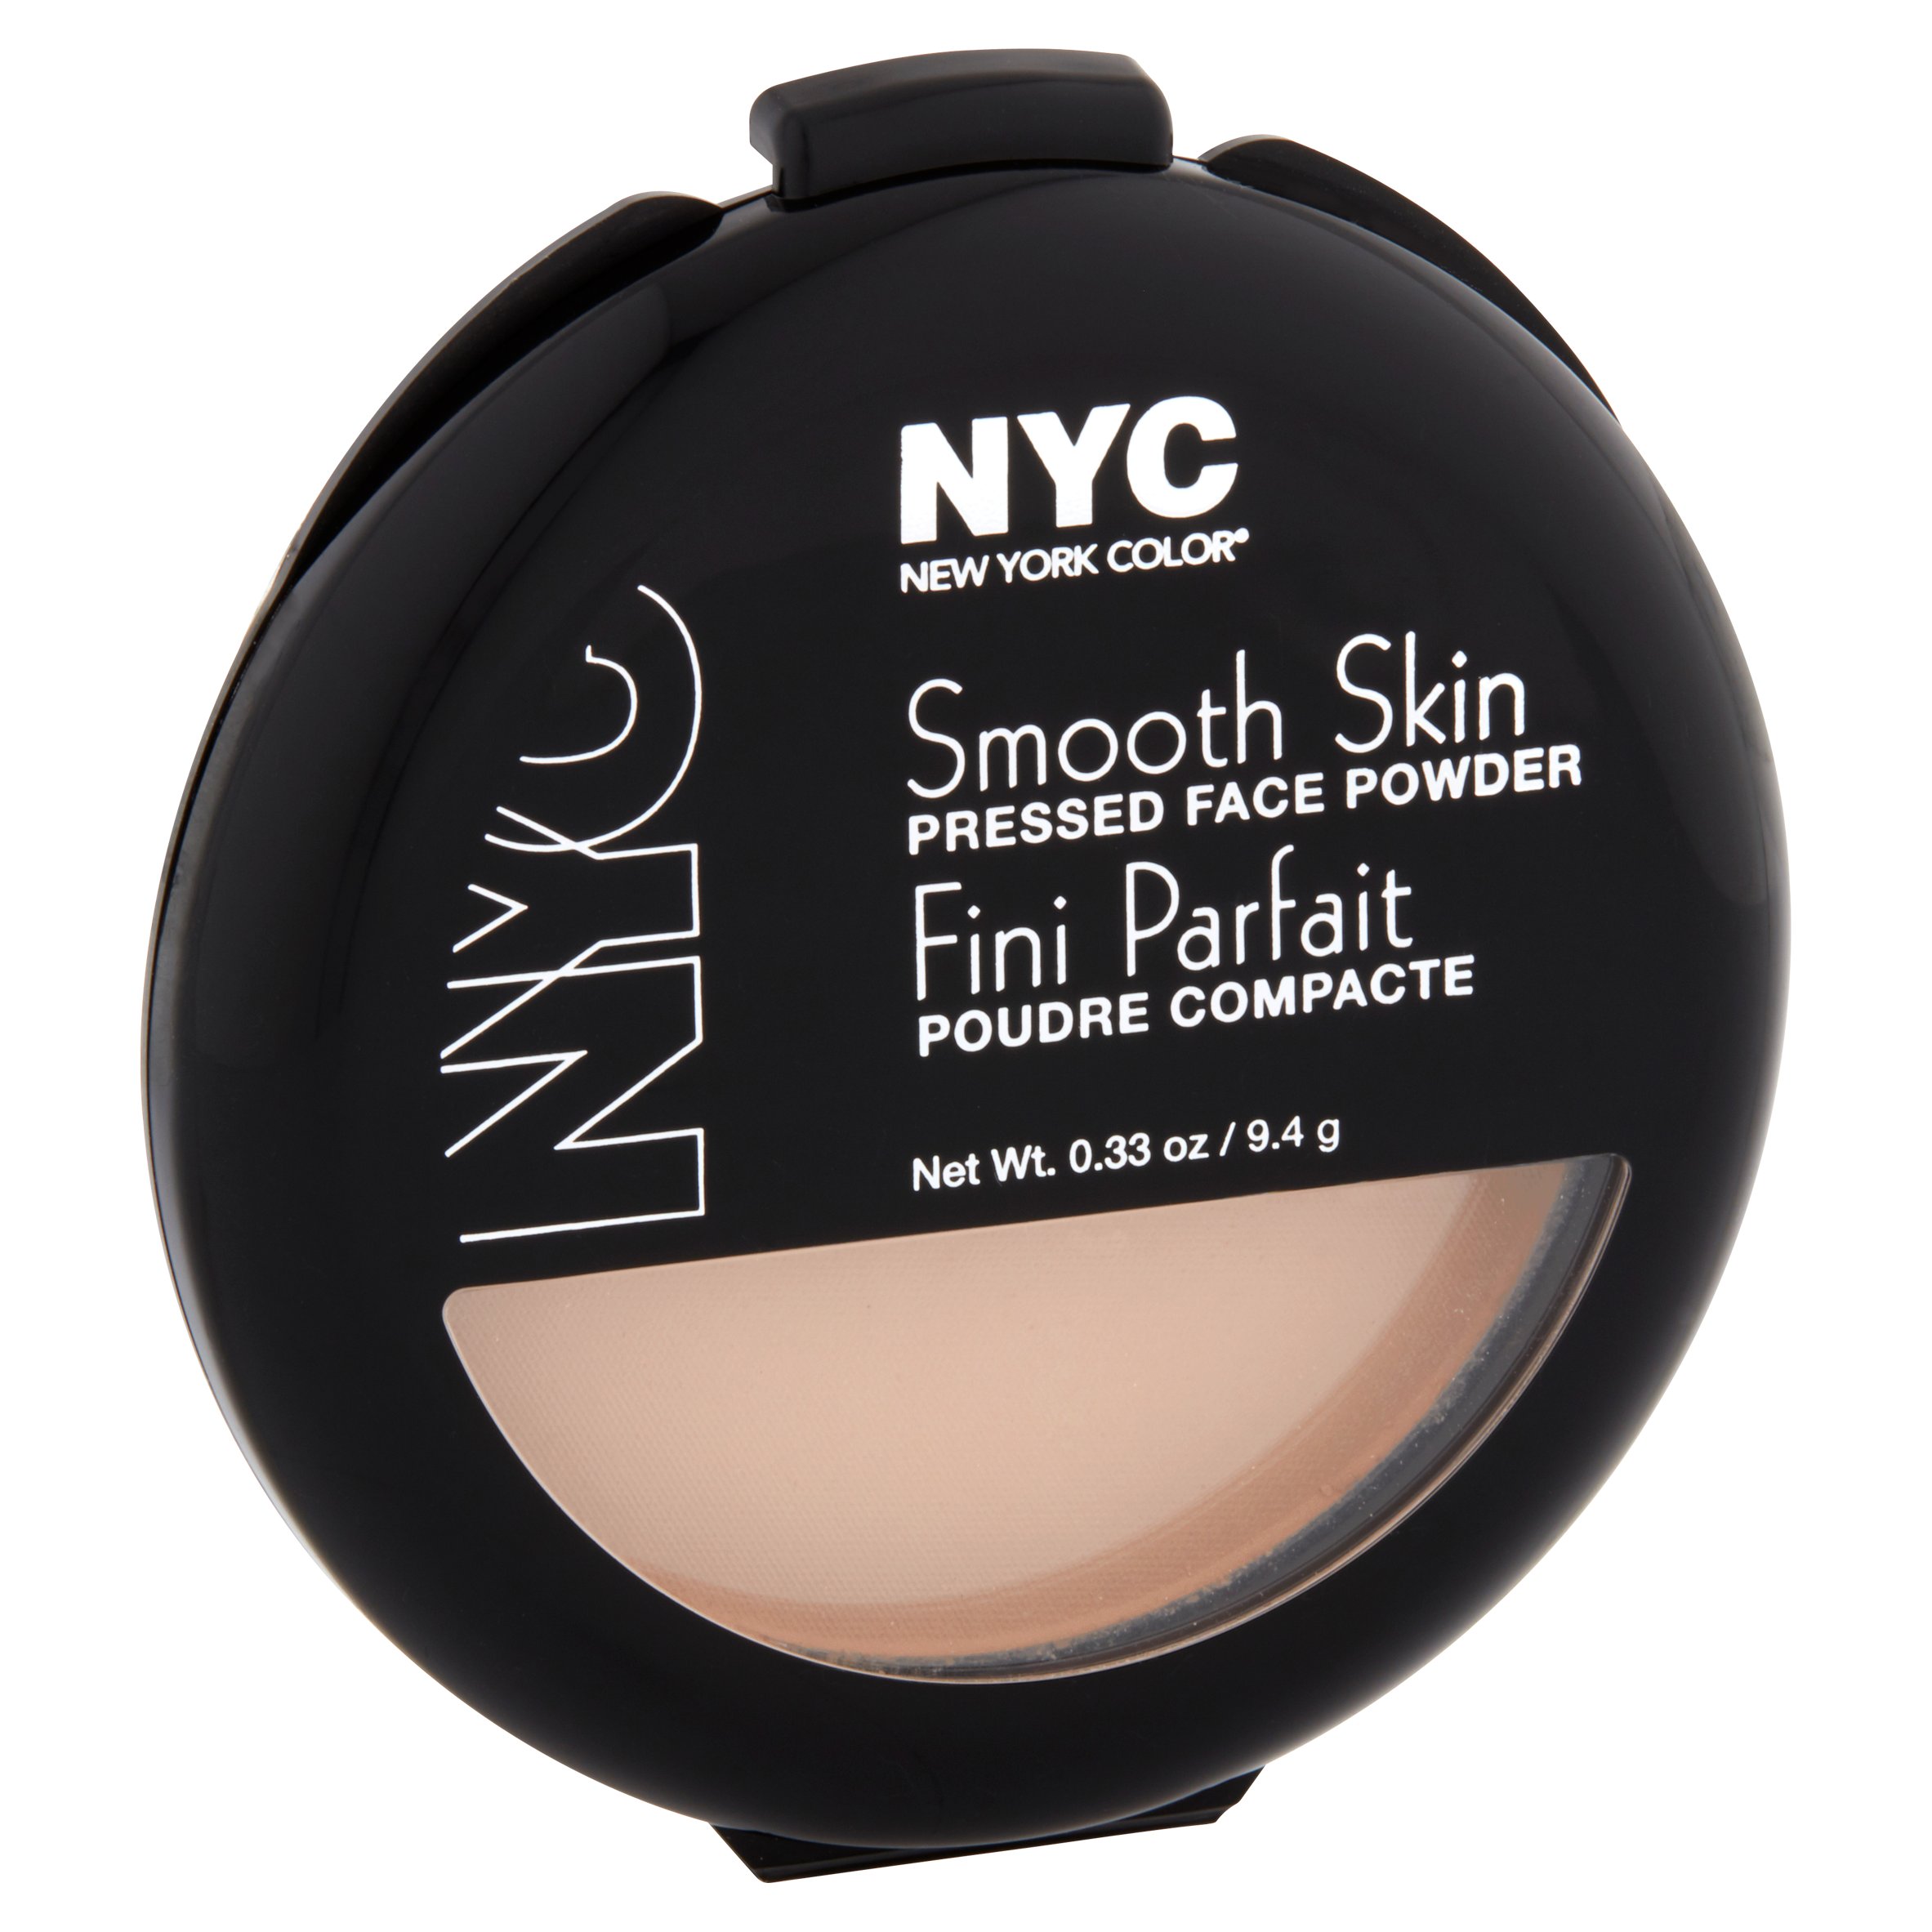 New york color smooth skin 704a warm beige pressed face powder, 0.33 oz - image 2 of 4